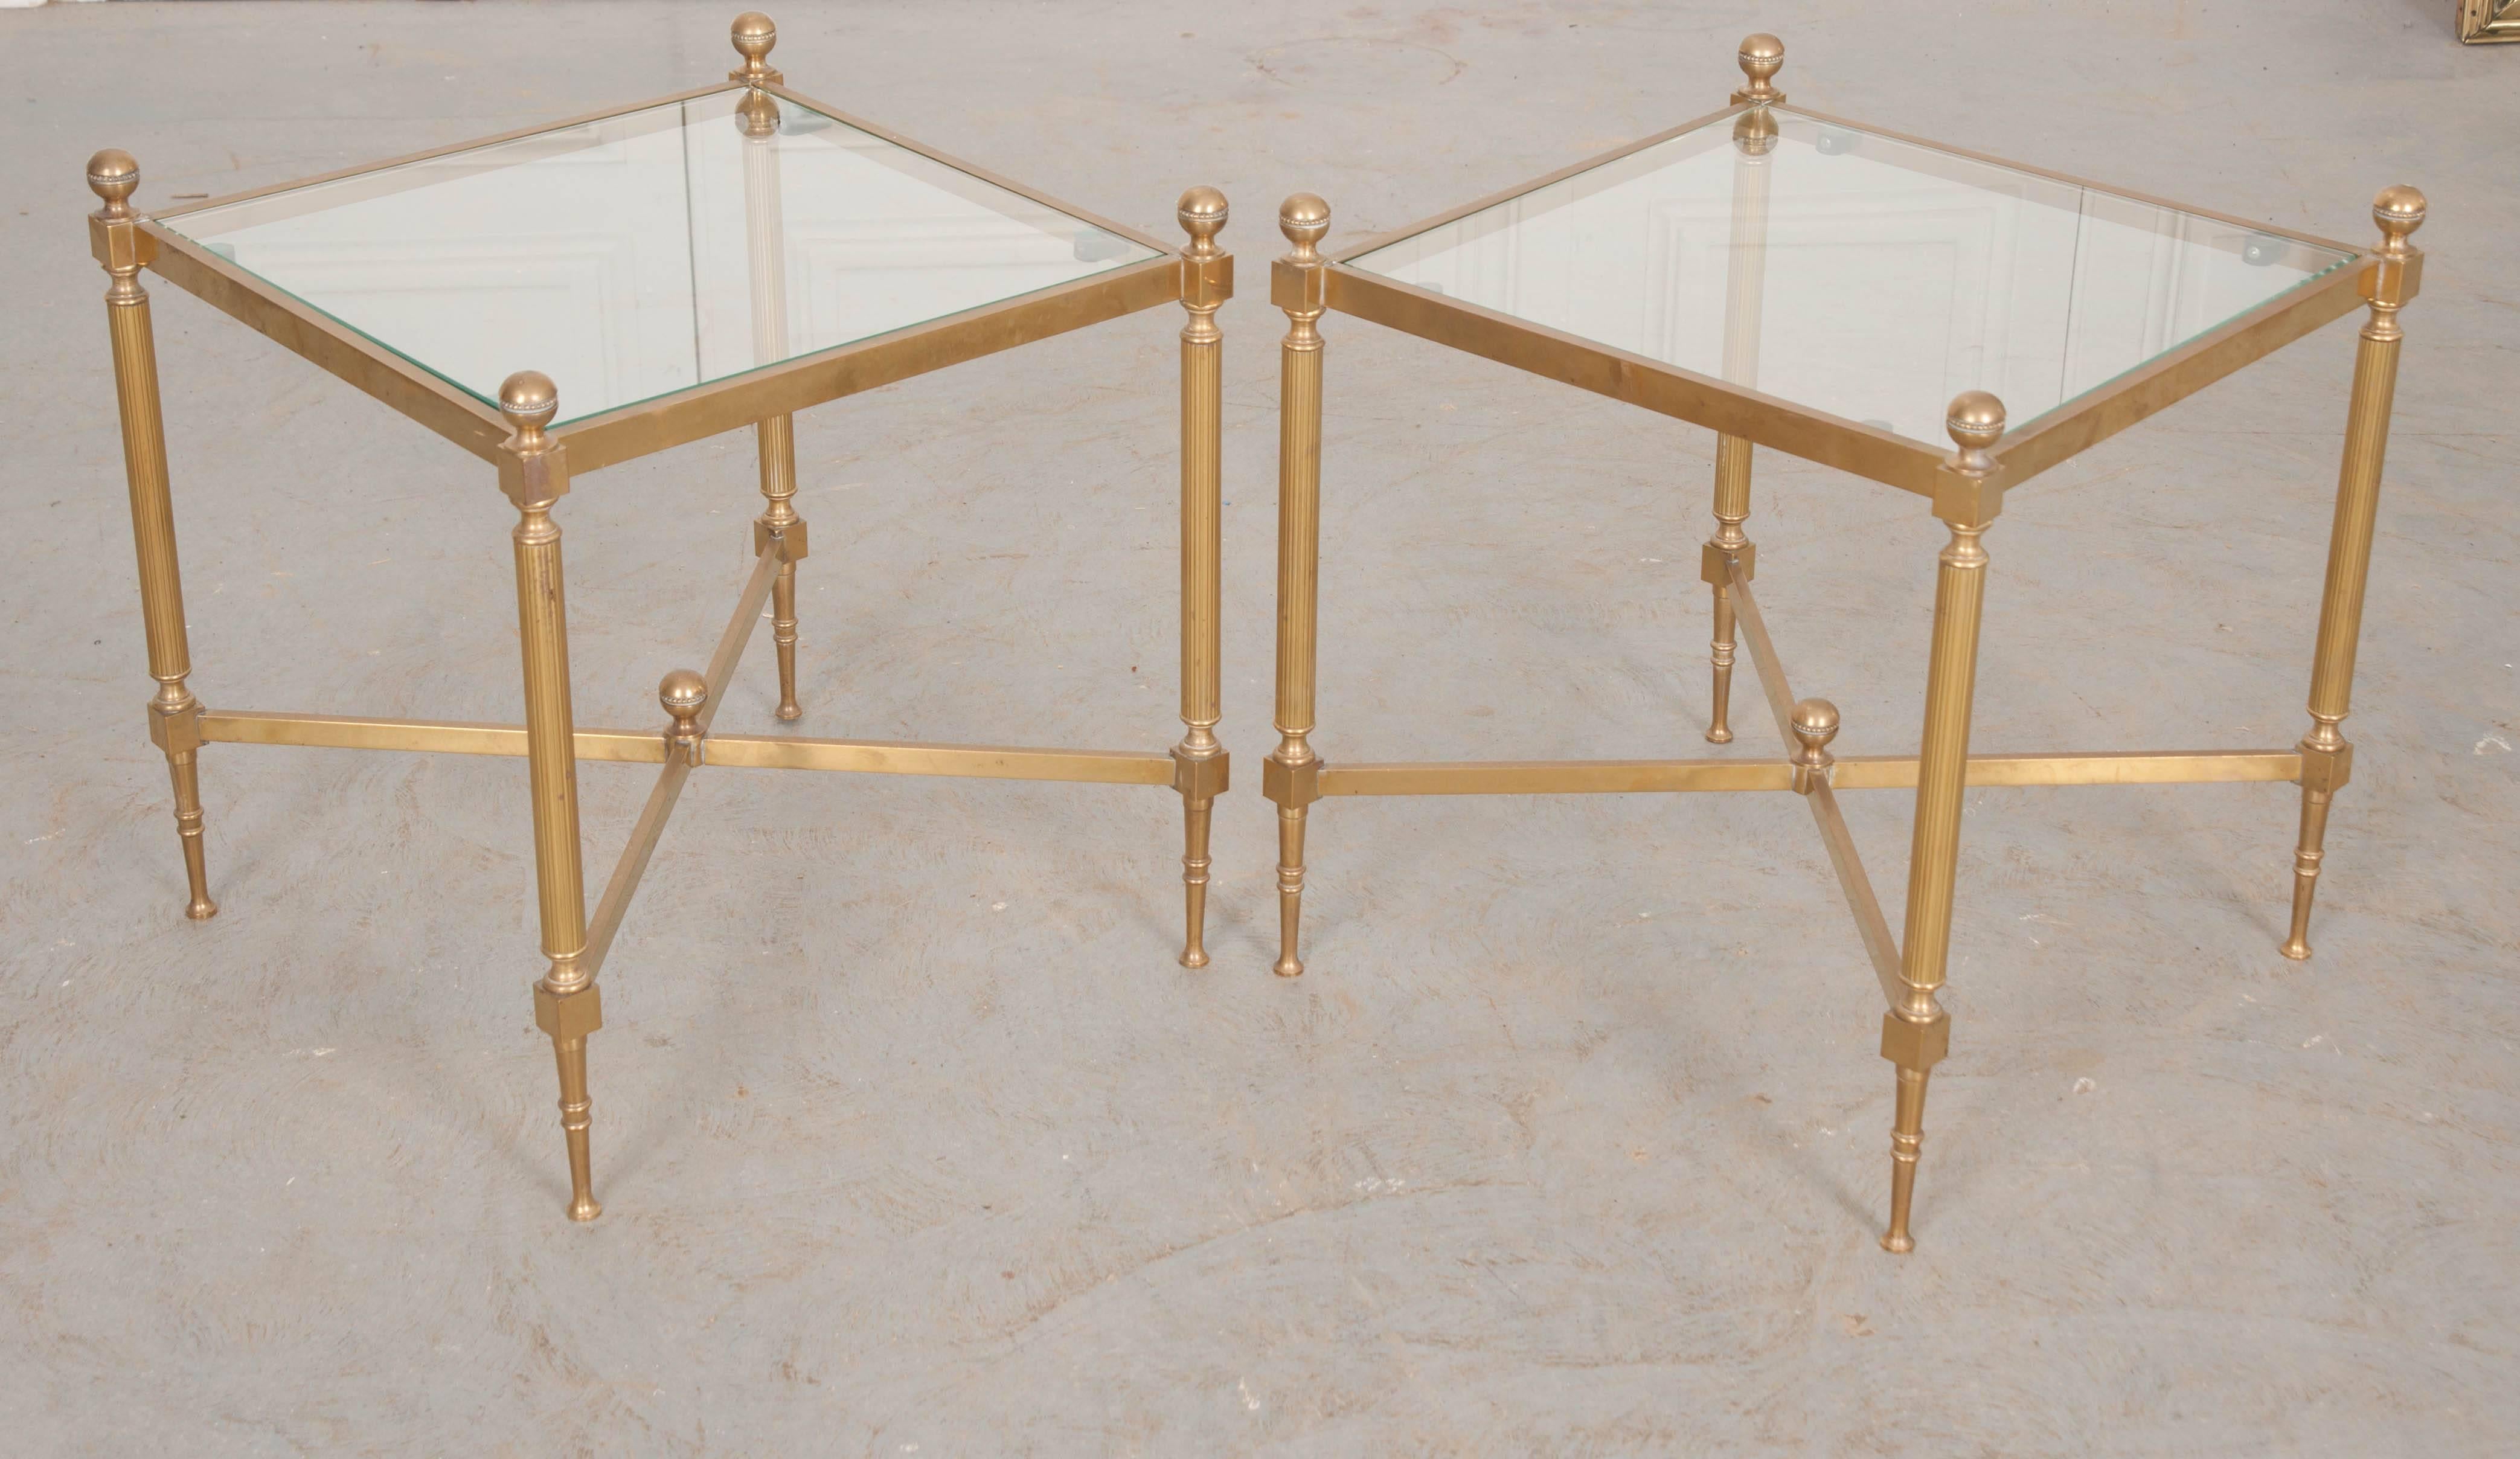 A sharp pair of early 20th Jansen style square side tables, made of brass and glass in the early 1900s, France. The tables have radiant brass frames with an inset glass top. The tables’ legs are pushed to the corners and decorated with reeded shafts